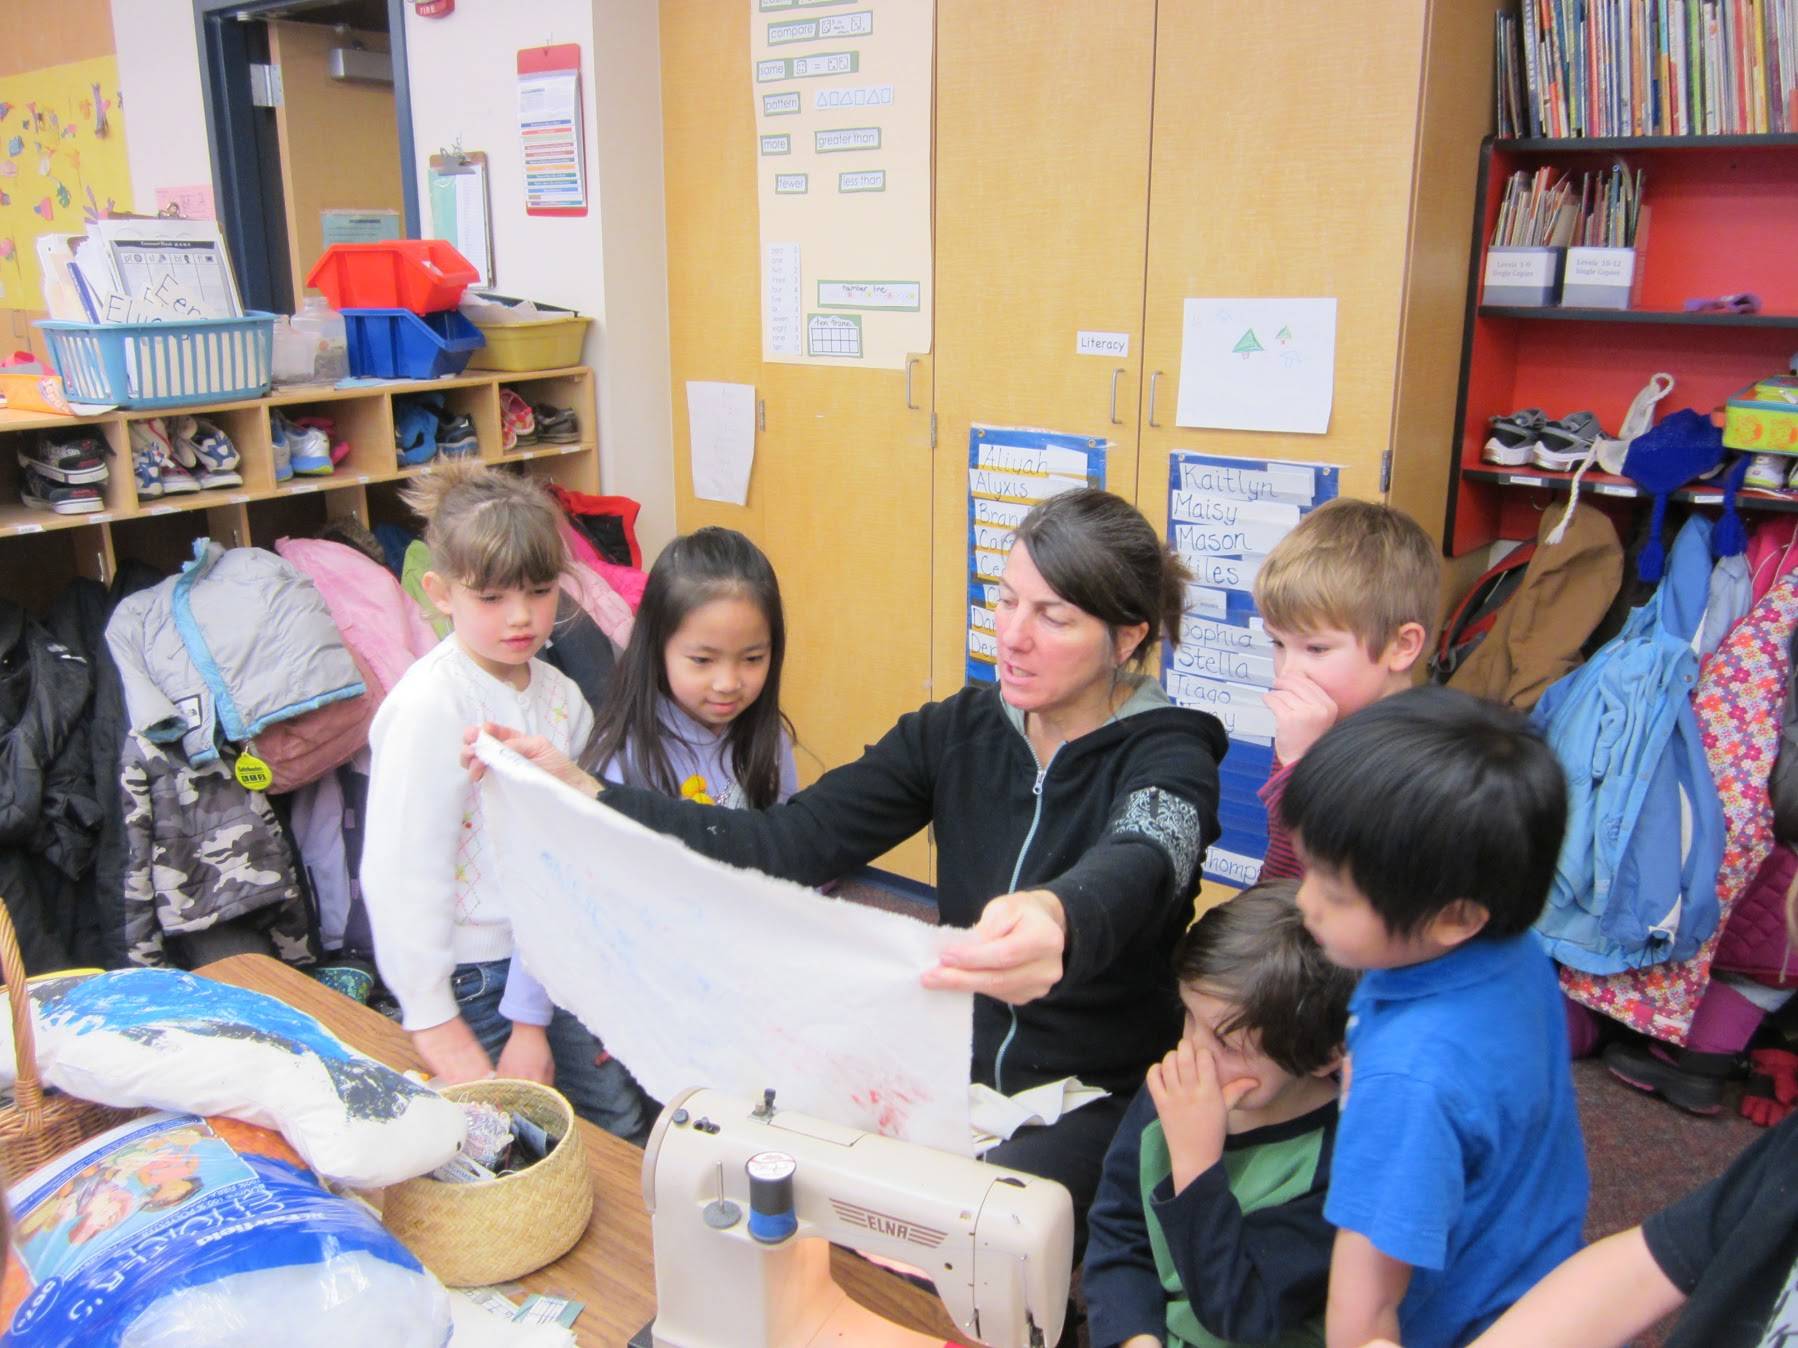 Jennifer Thompson with her students at Harborview Elementary School. (Courtesy Photo)